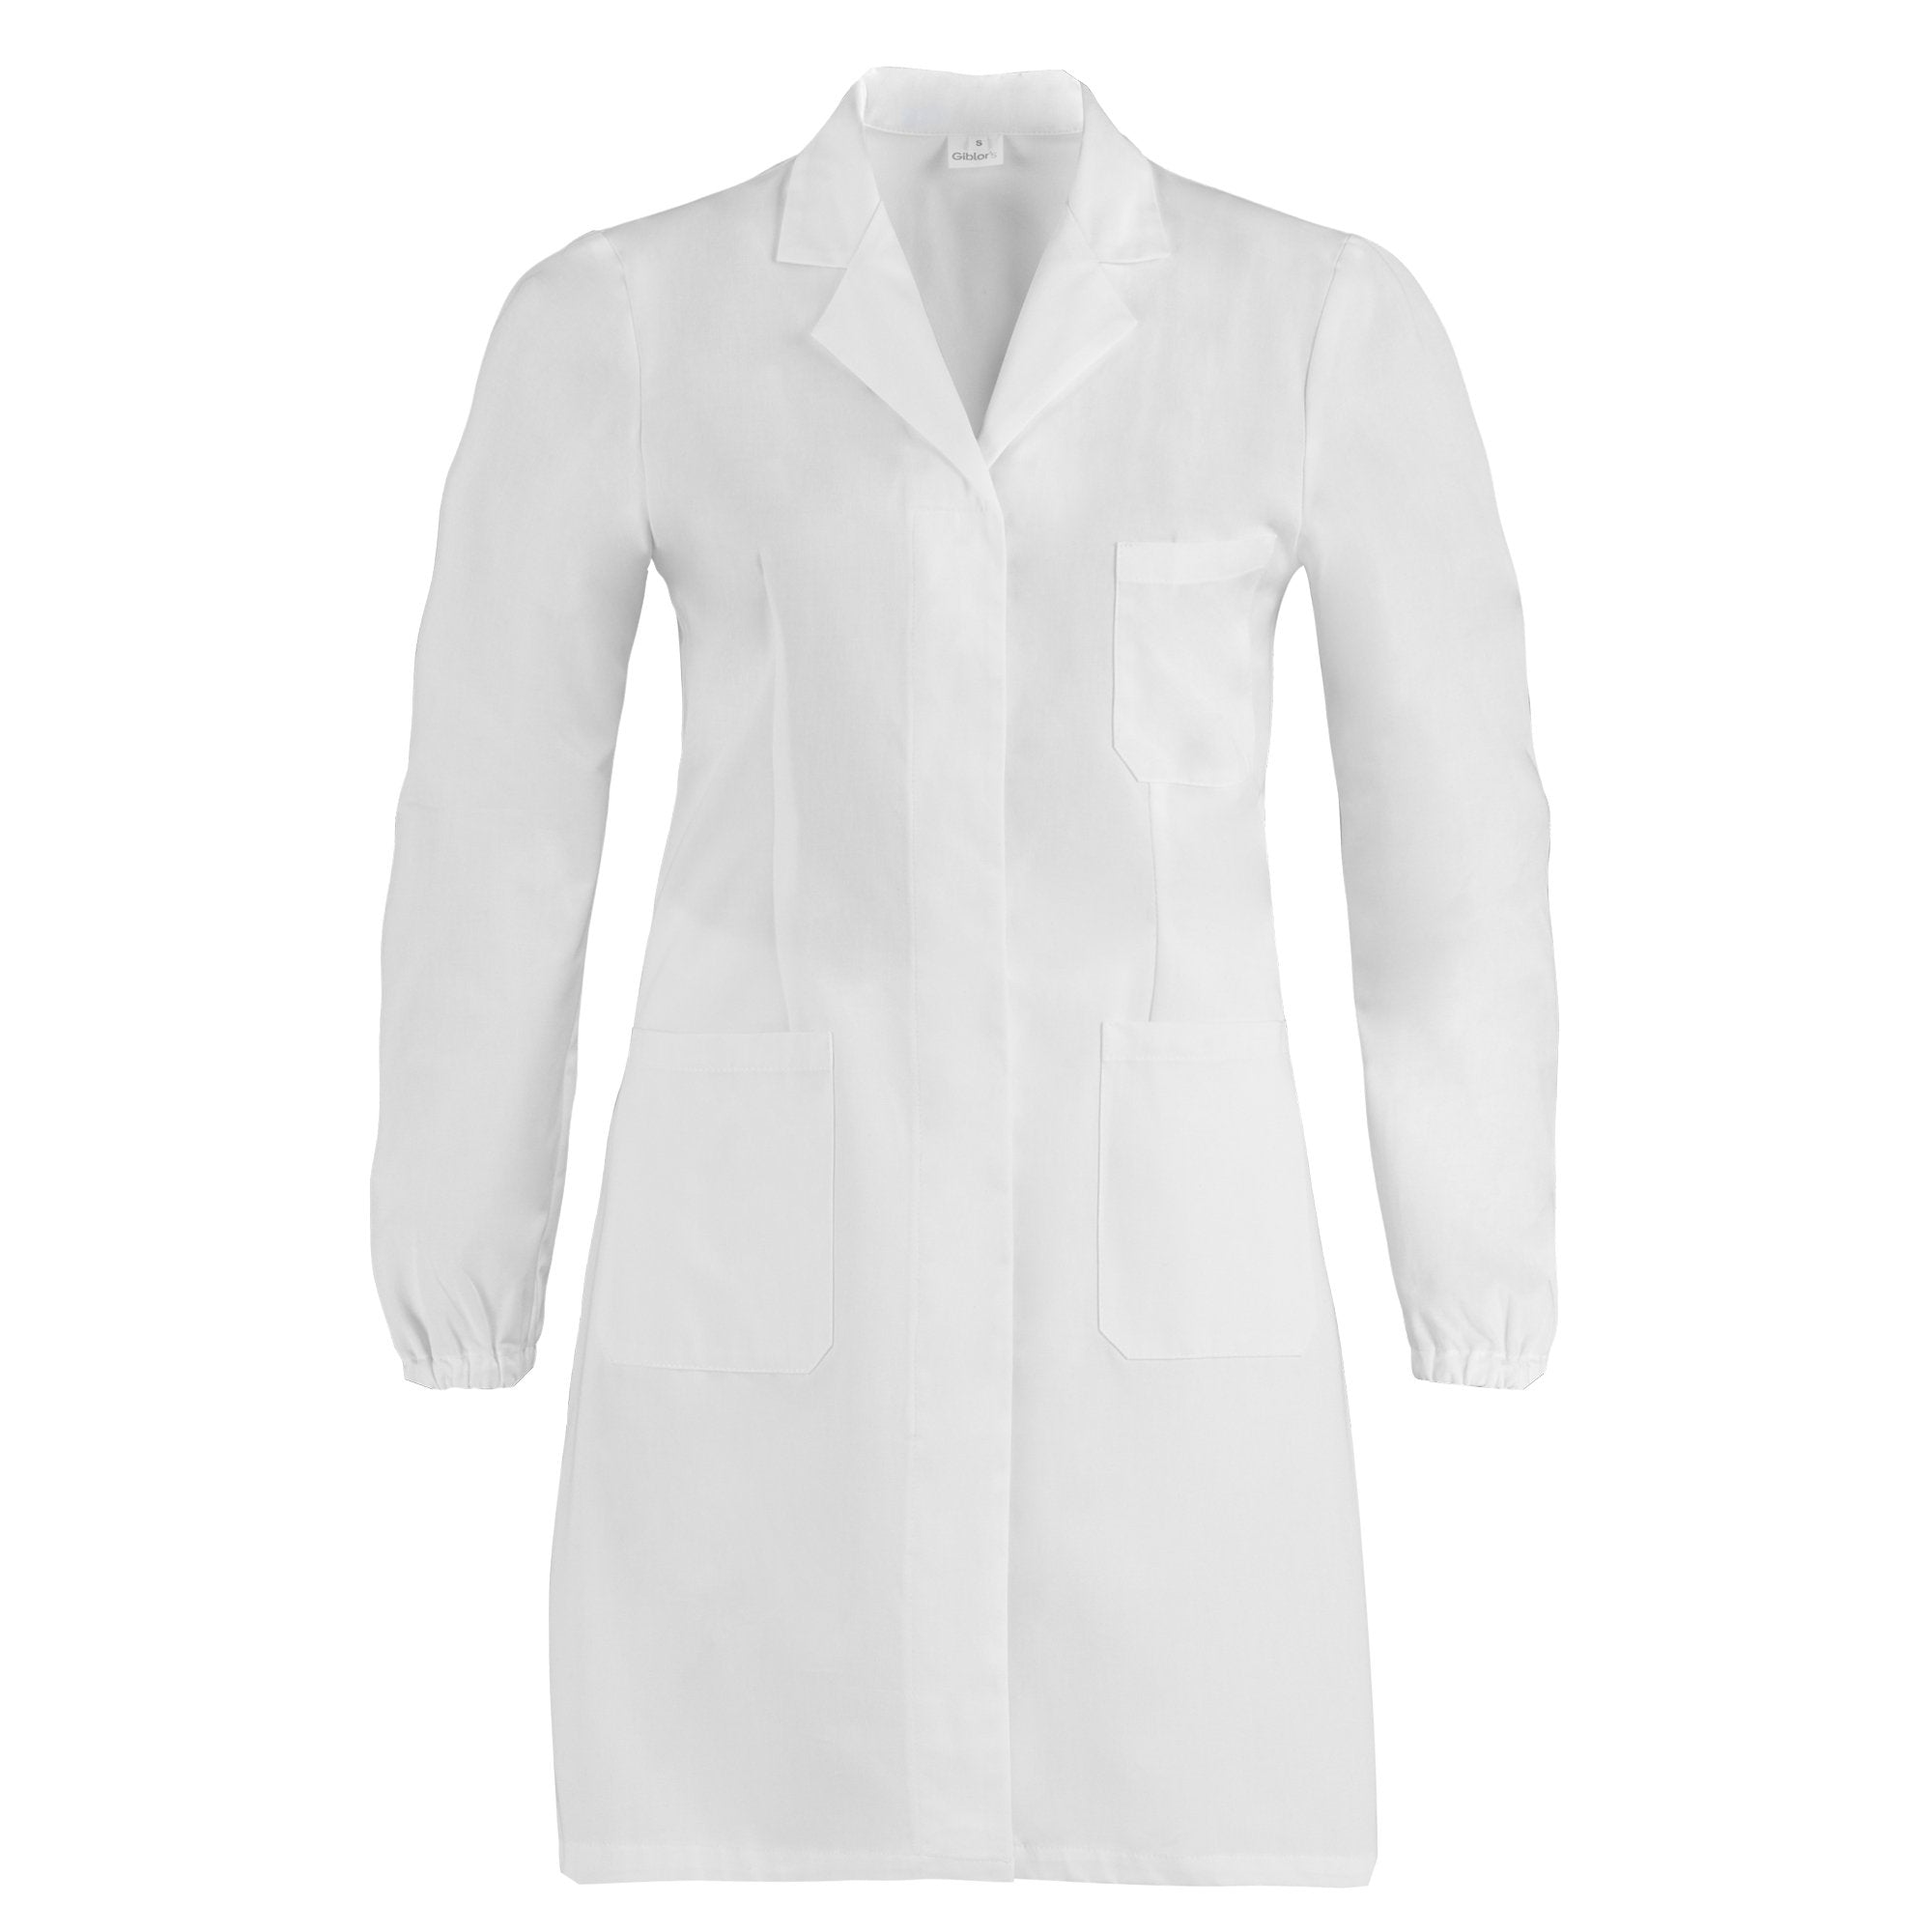 giblor's-camice-isotta-donna-tg-m-bianco